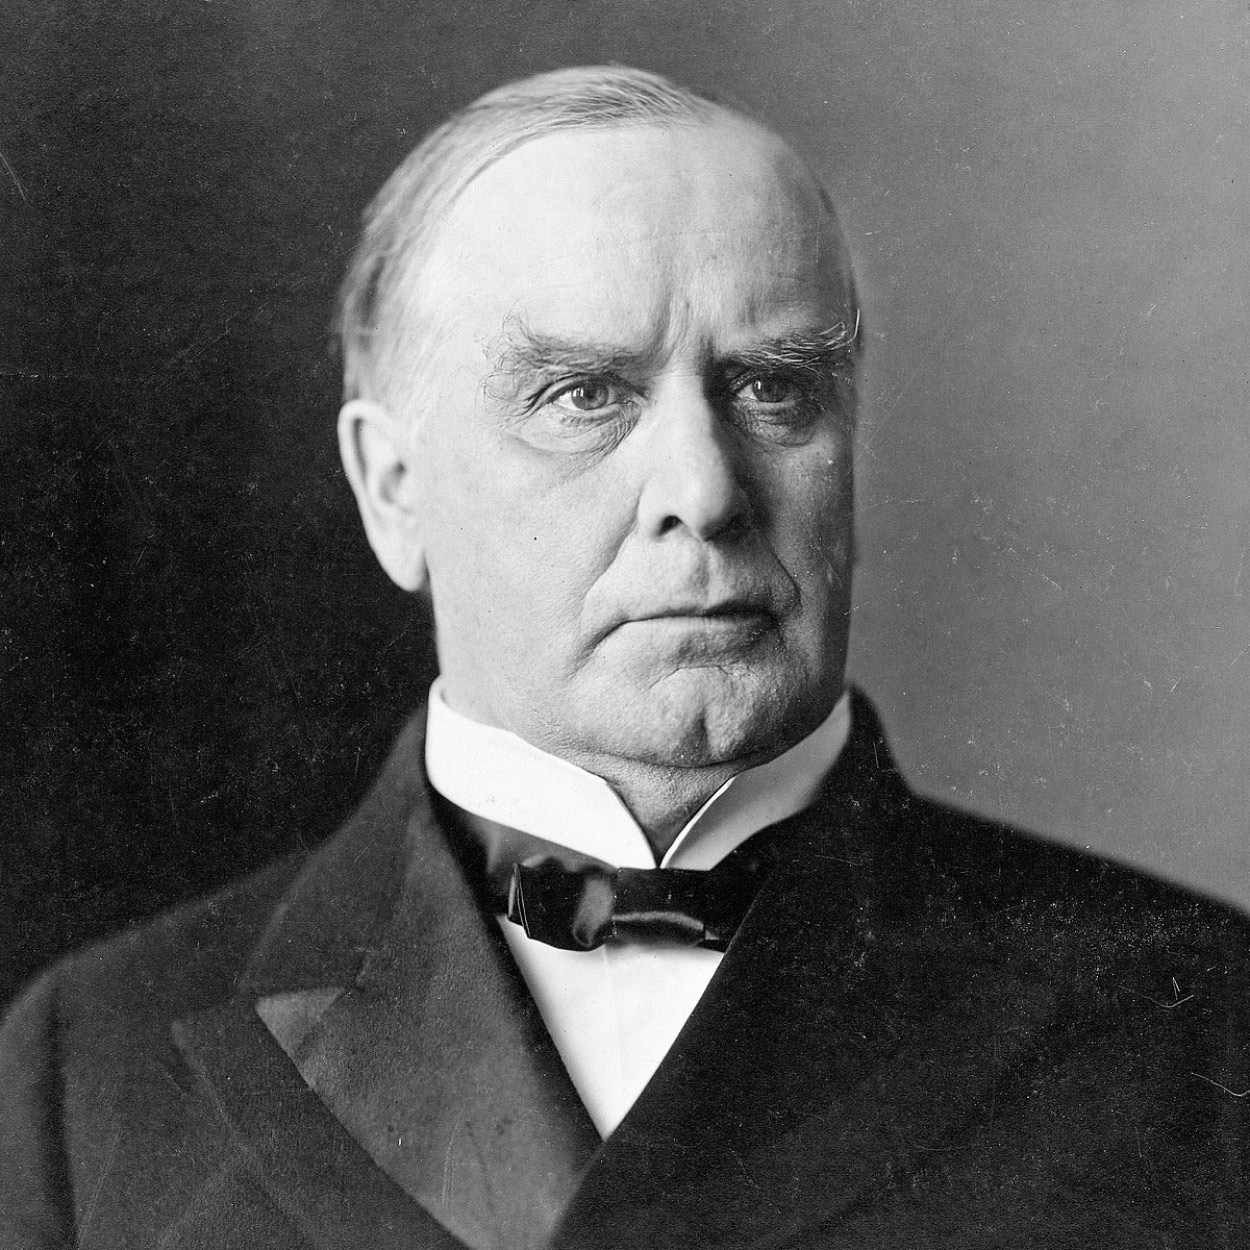 Portrait of William McKinley, the 25th President of the United States